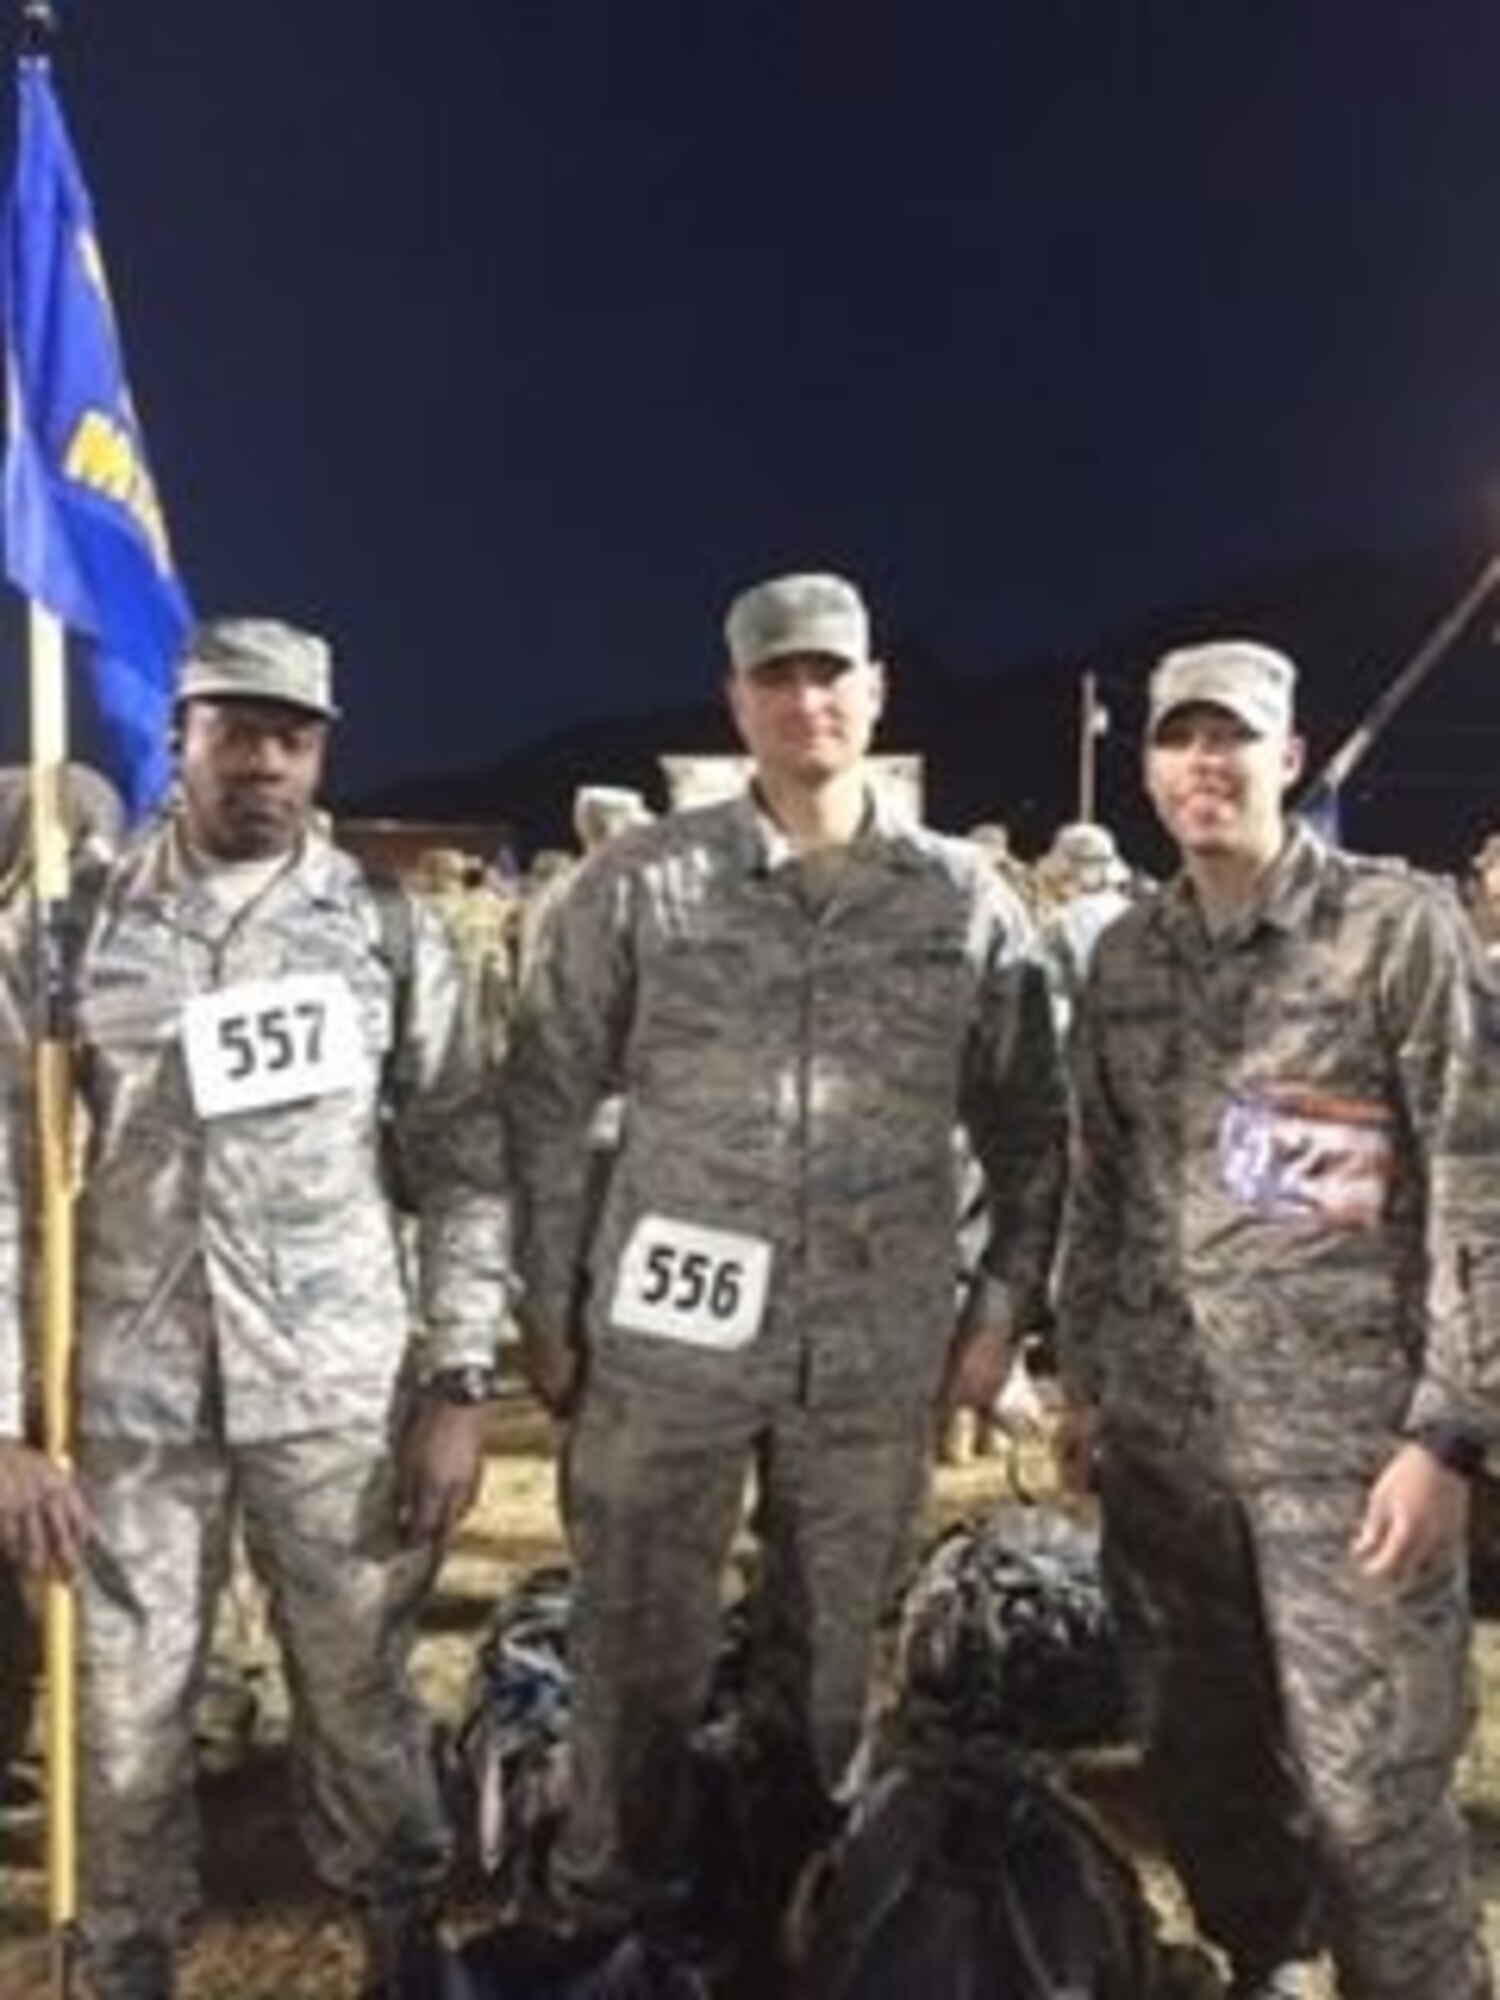 Tech. Sgt Sean Devereaux, right, 22nd Medical Operations Squadron, physical therapy NCO in-charge, poses for a picture after completing the Bataan Death March March 4, 2016.  Each year, men and women pay their respects to those who lost their lives during the tragic march in the Philippines during WWII.  (Courtesy Photo)

